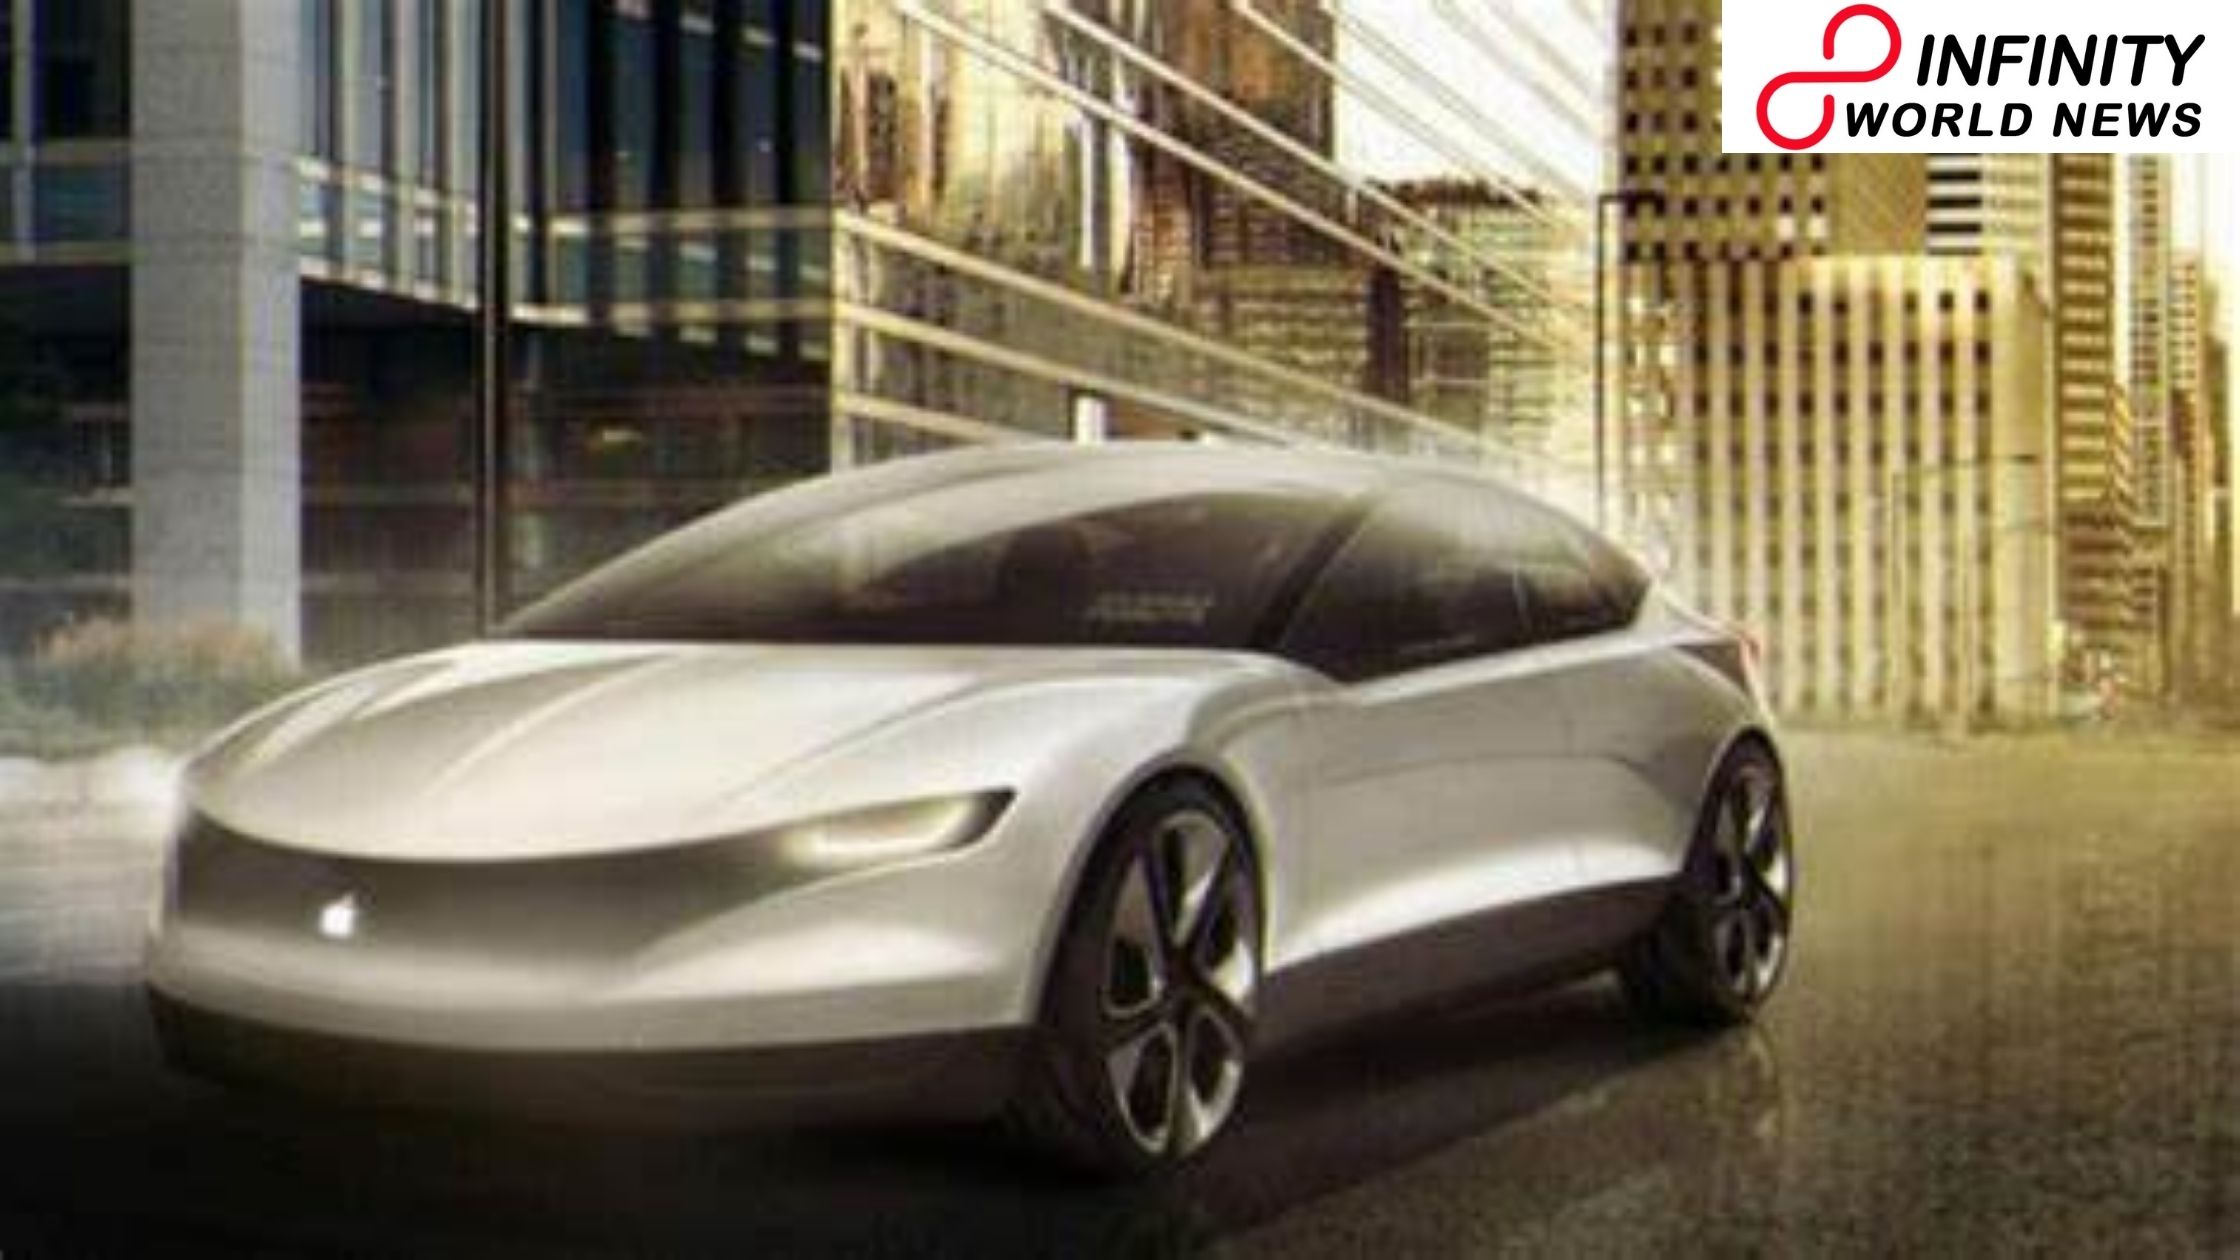 Apple Might Be Accomplishing on an Electric Car: Here's What You Must Know